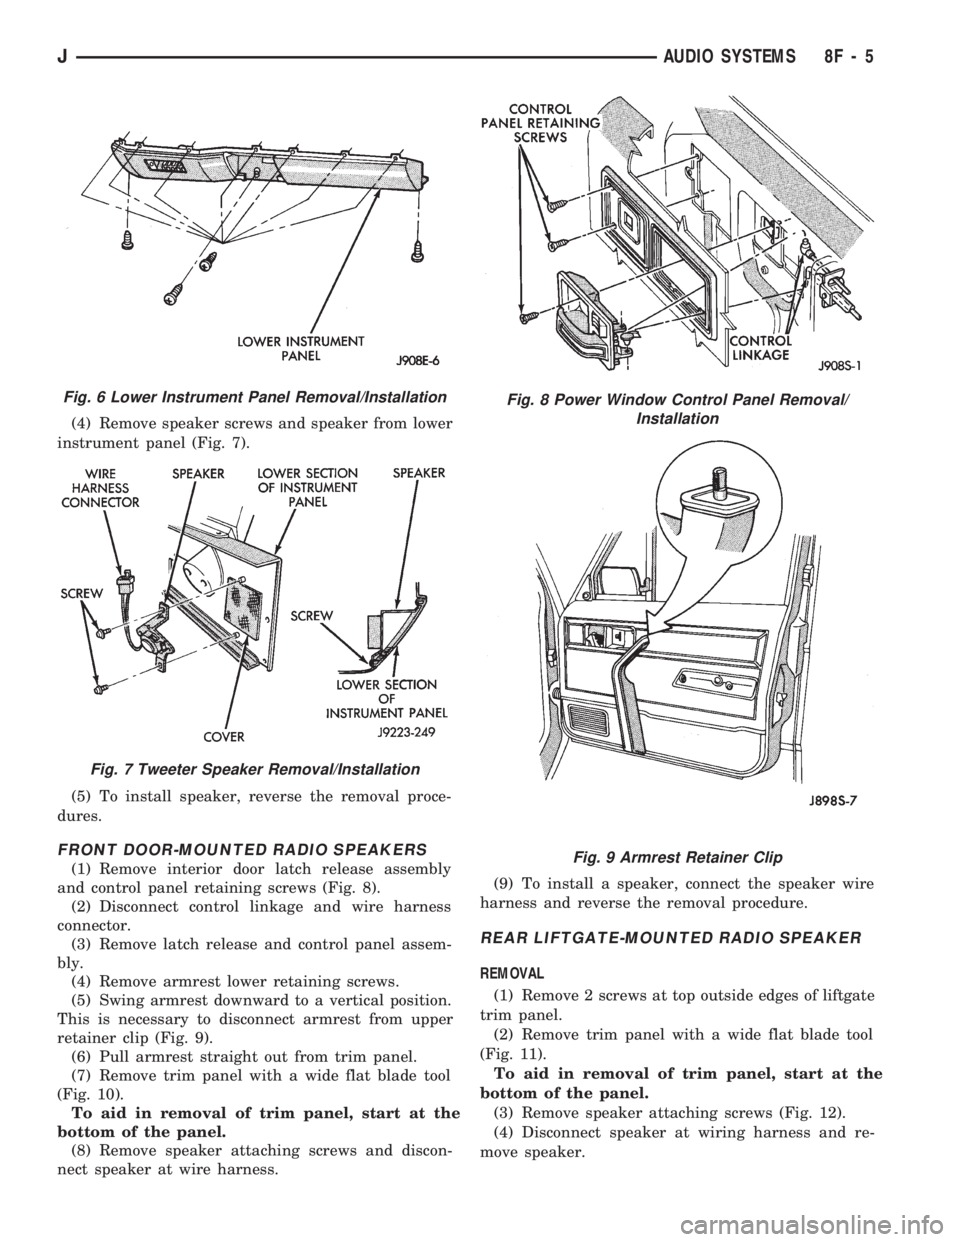 JEEP WRANGLER 1994  Owners Manual Fig. 7 Tweeter Speaker Removal/Installation
Fig. 8 Power Window Control Panel Removal/
Installation
Fig. 9 Armrest Retainer Clip
JAUDIO SYSTEMS 8F - 5 